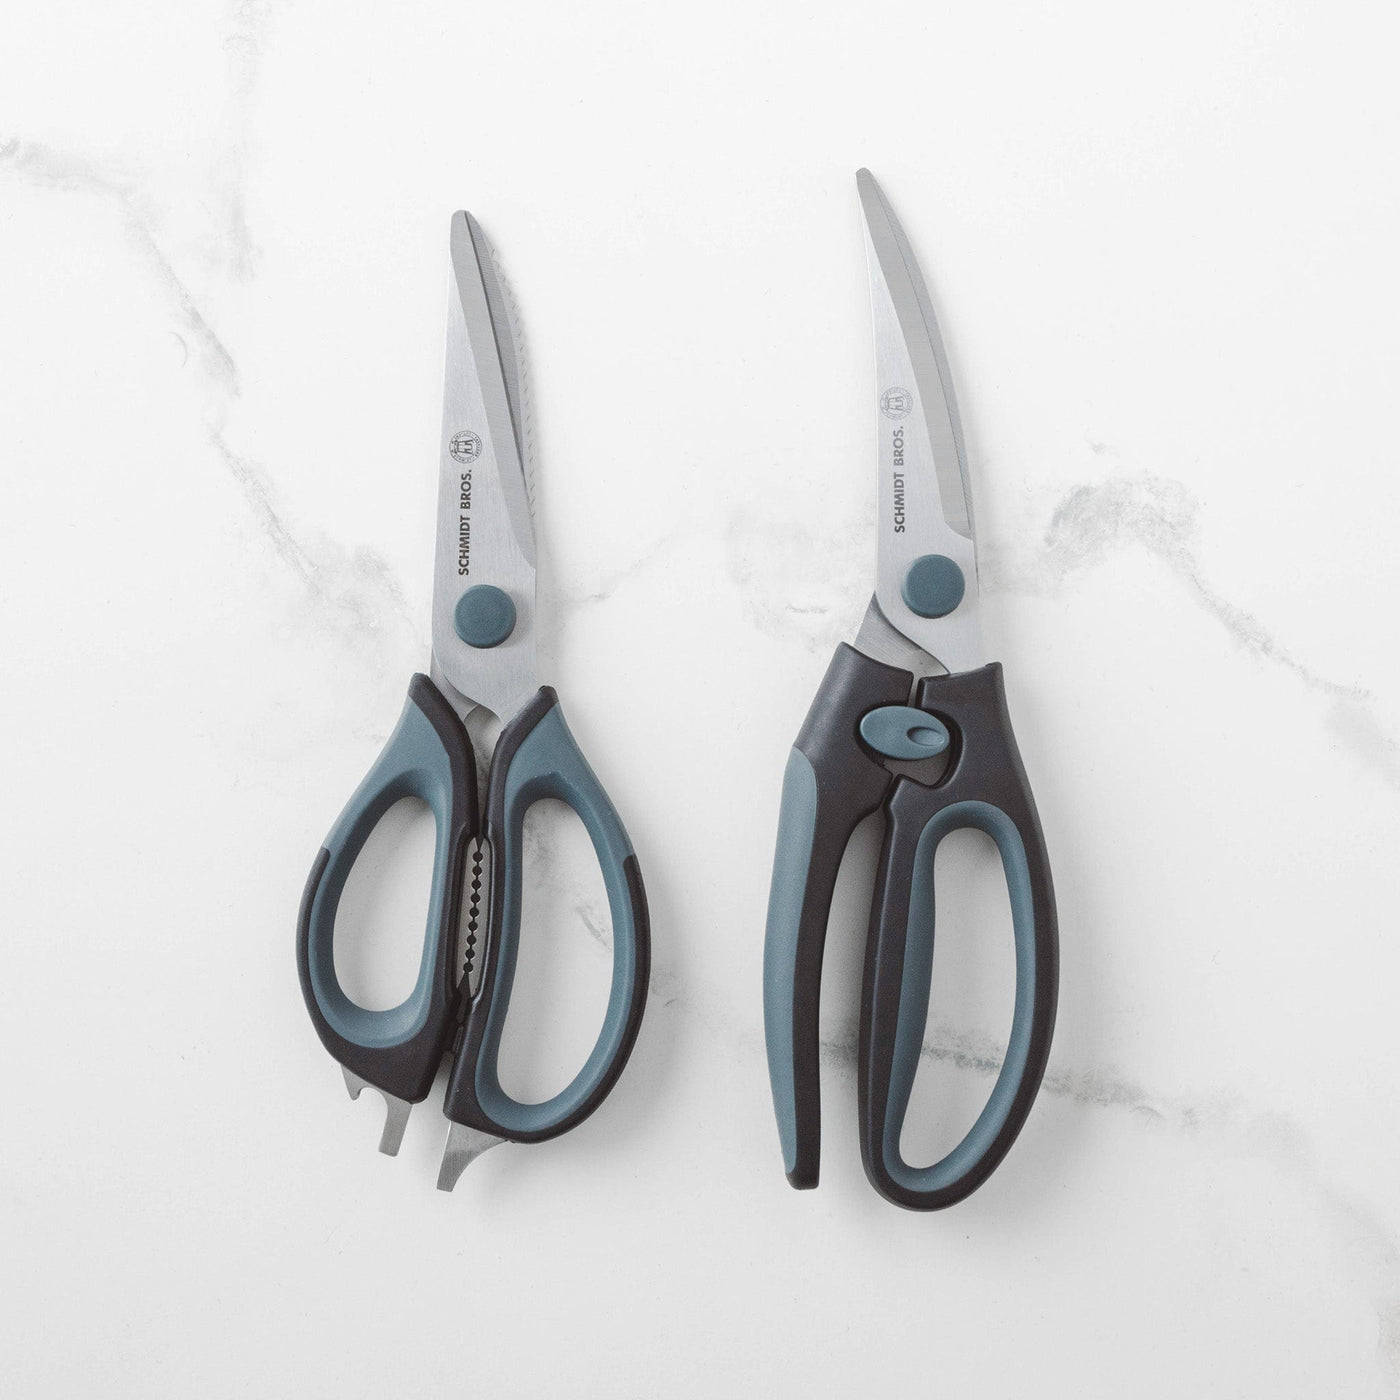 Schmidt Brothers Stainless Steel Kitchen Shears + Reviews